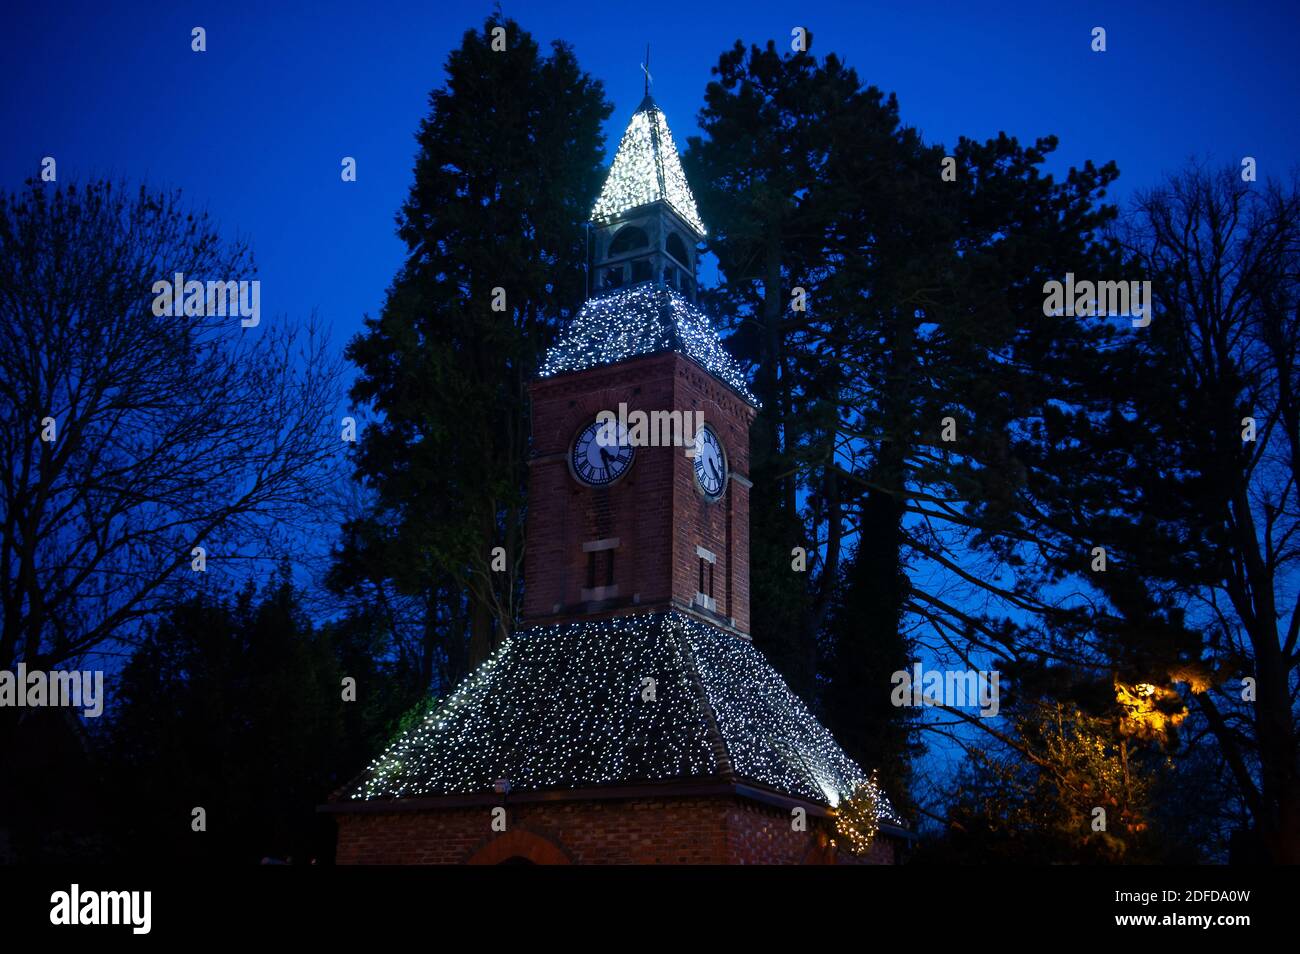 Wendover, Buckinghamshire, UK. 1st December, 2020. The Clock Tower in Wendover sparkles with Christmas lights. Local shops and pubs in Wendover are hoping for a busy December as they reopen after the second Covid-19 lockdown ends and the town goes into Tier 2. Credit: Maureen McLean/Alamy Stock Photo